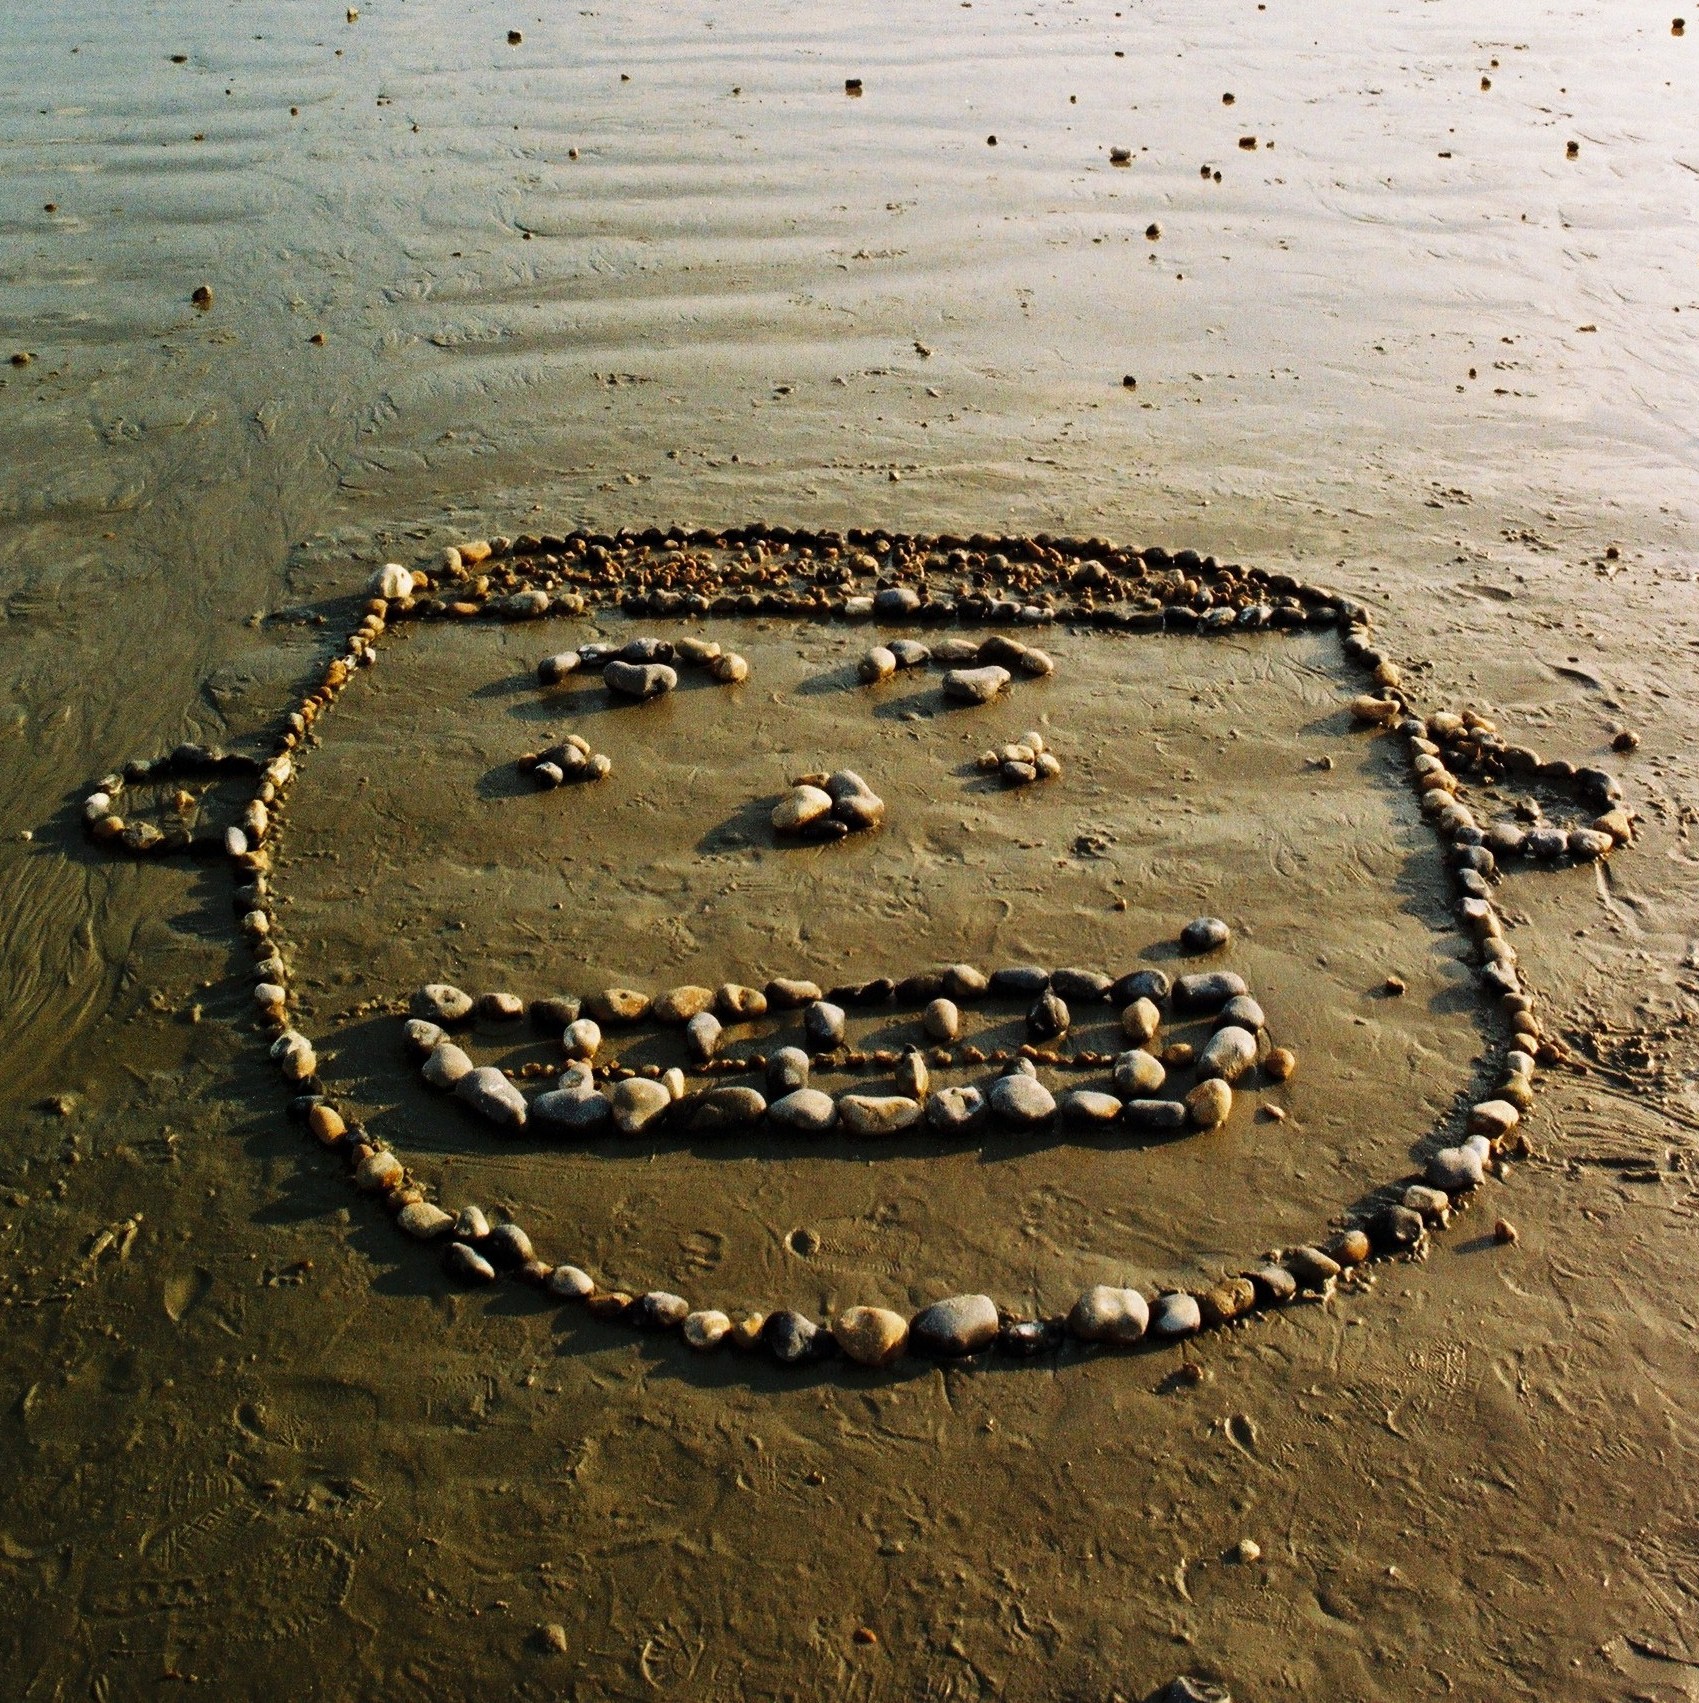 smiley face made of pebbles